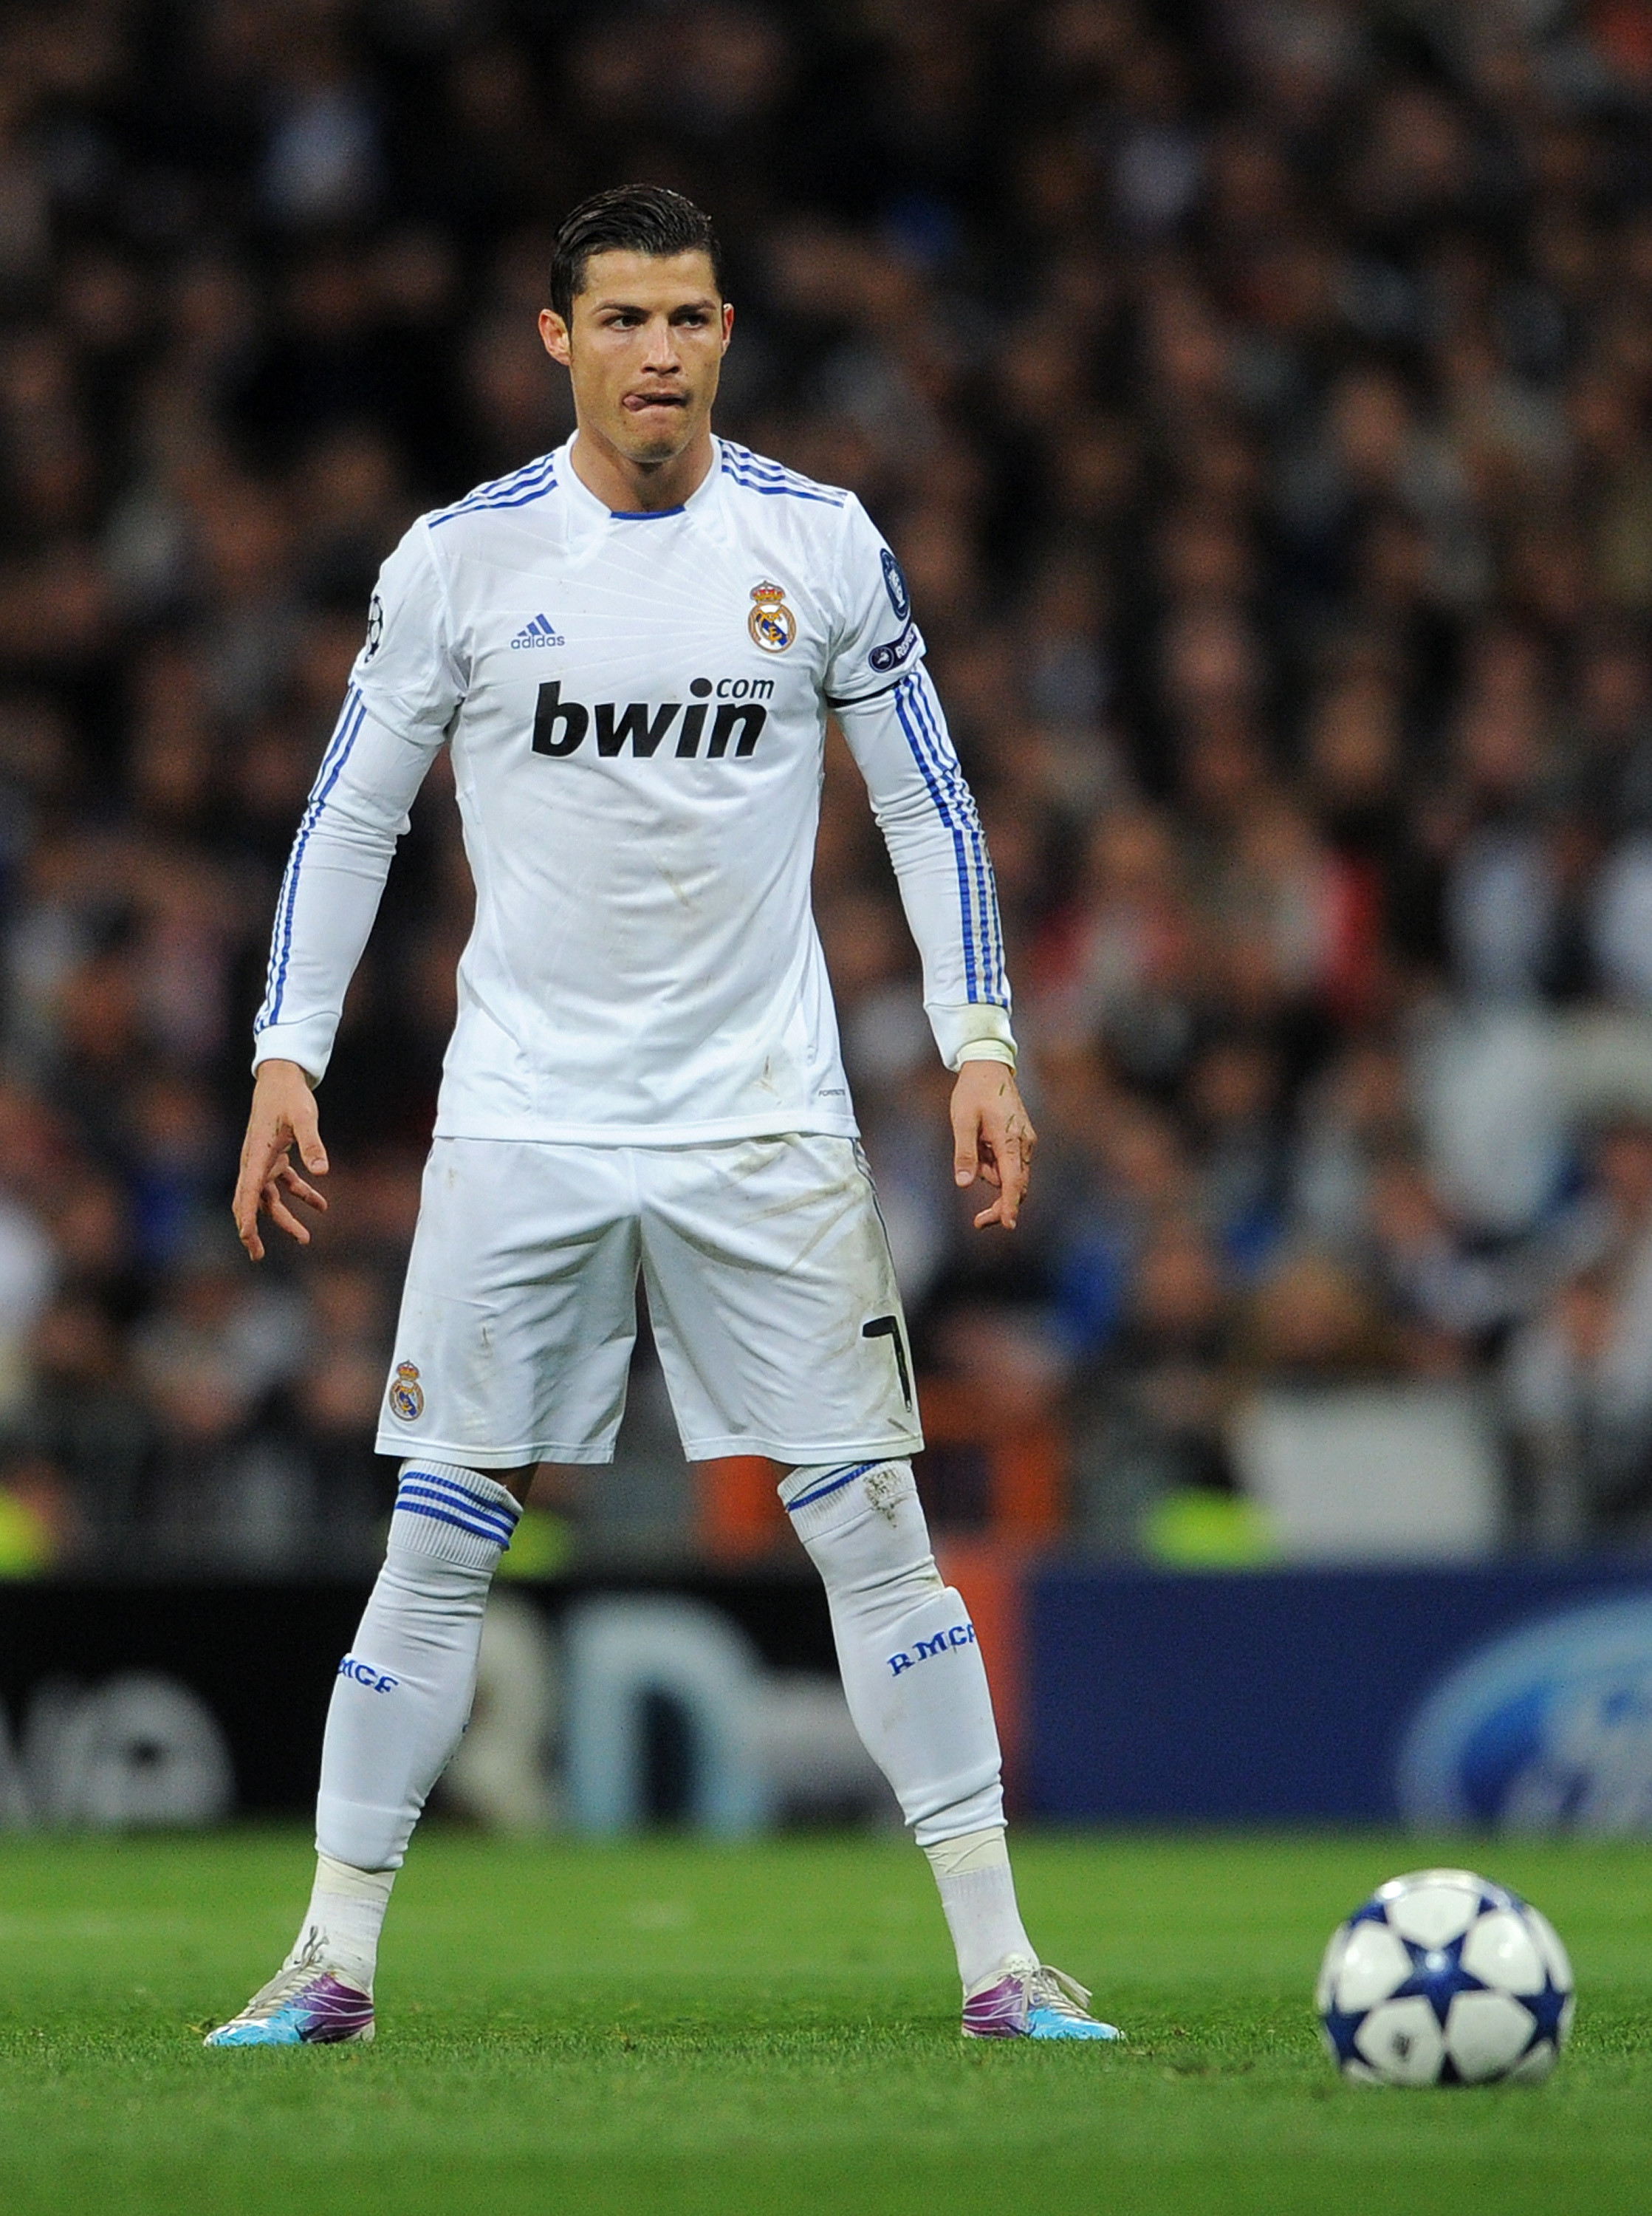 MADRID, SPAIN - MARCH 16:  Cristiano Ronaldo of Real Madrid lines up a free kick during the UEFA Champions League round of 16 second leg match between Real Madrid and Lyon at Estadio Santiago Bernabeu on March 16, 2011 in Madrid, Spain.  (Photo by Jasper